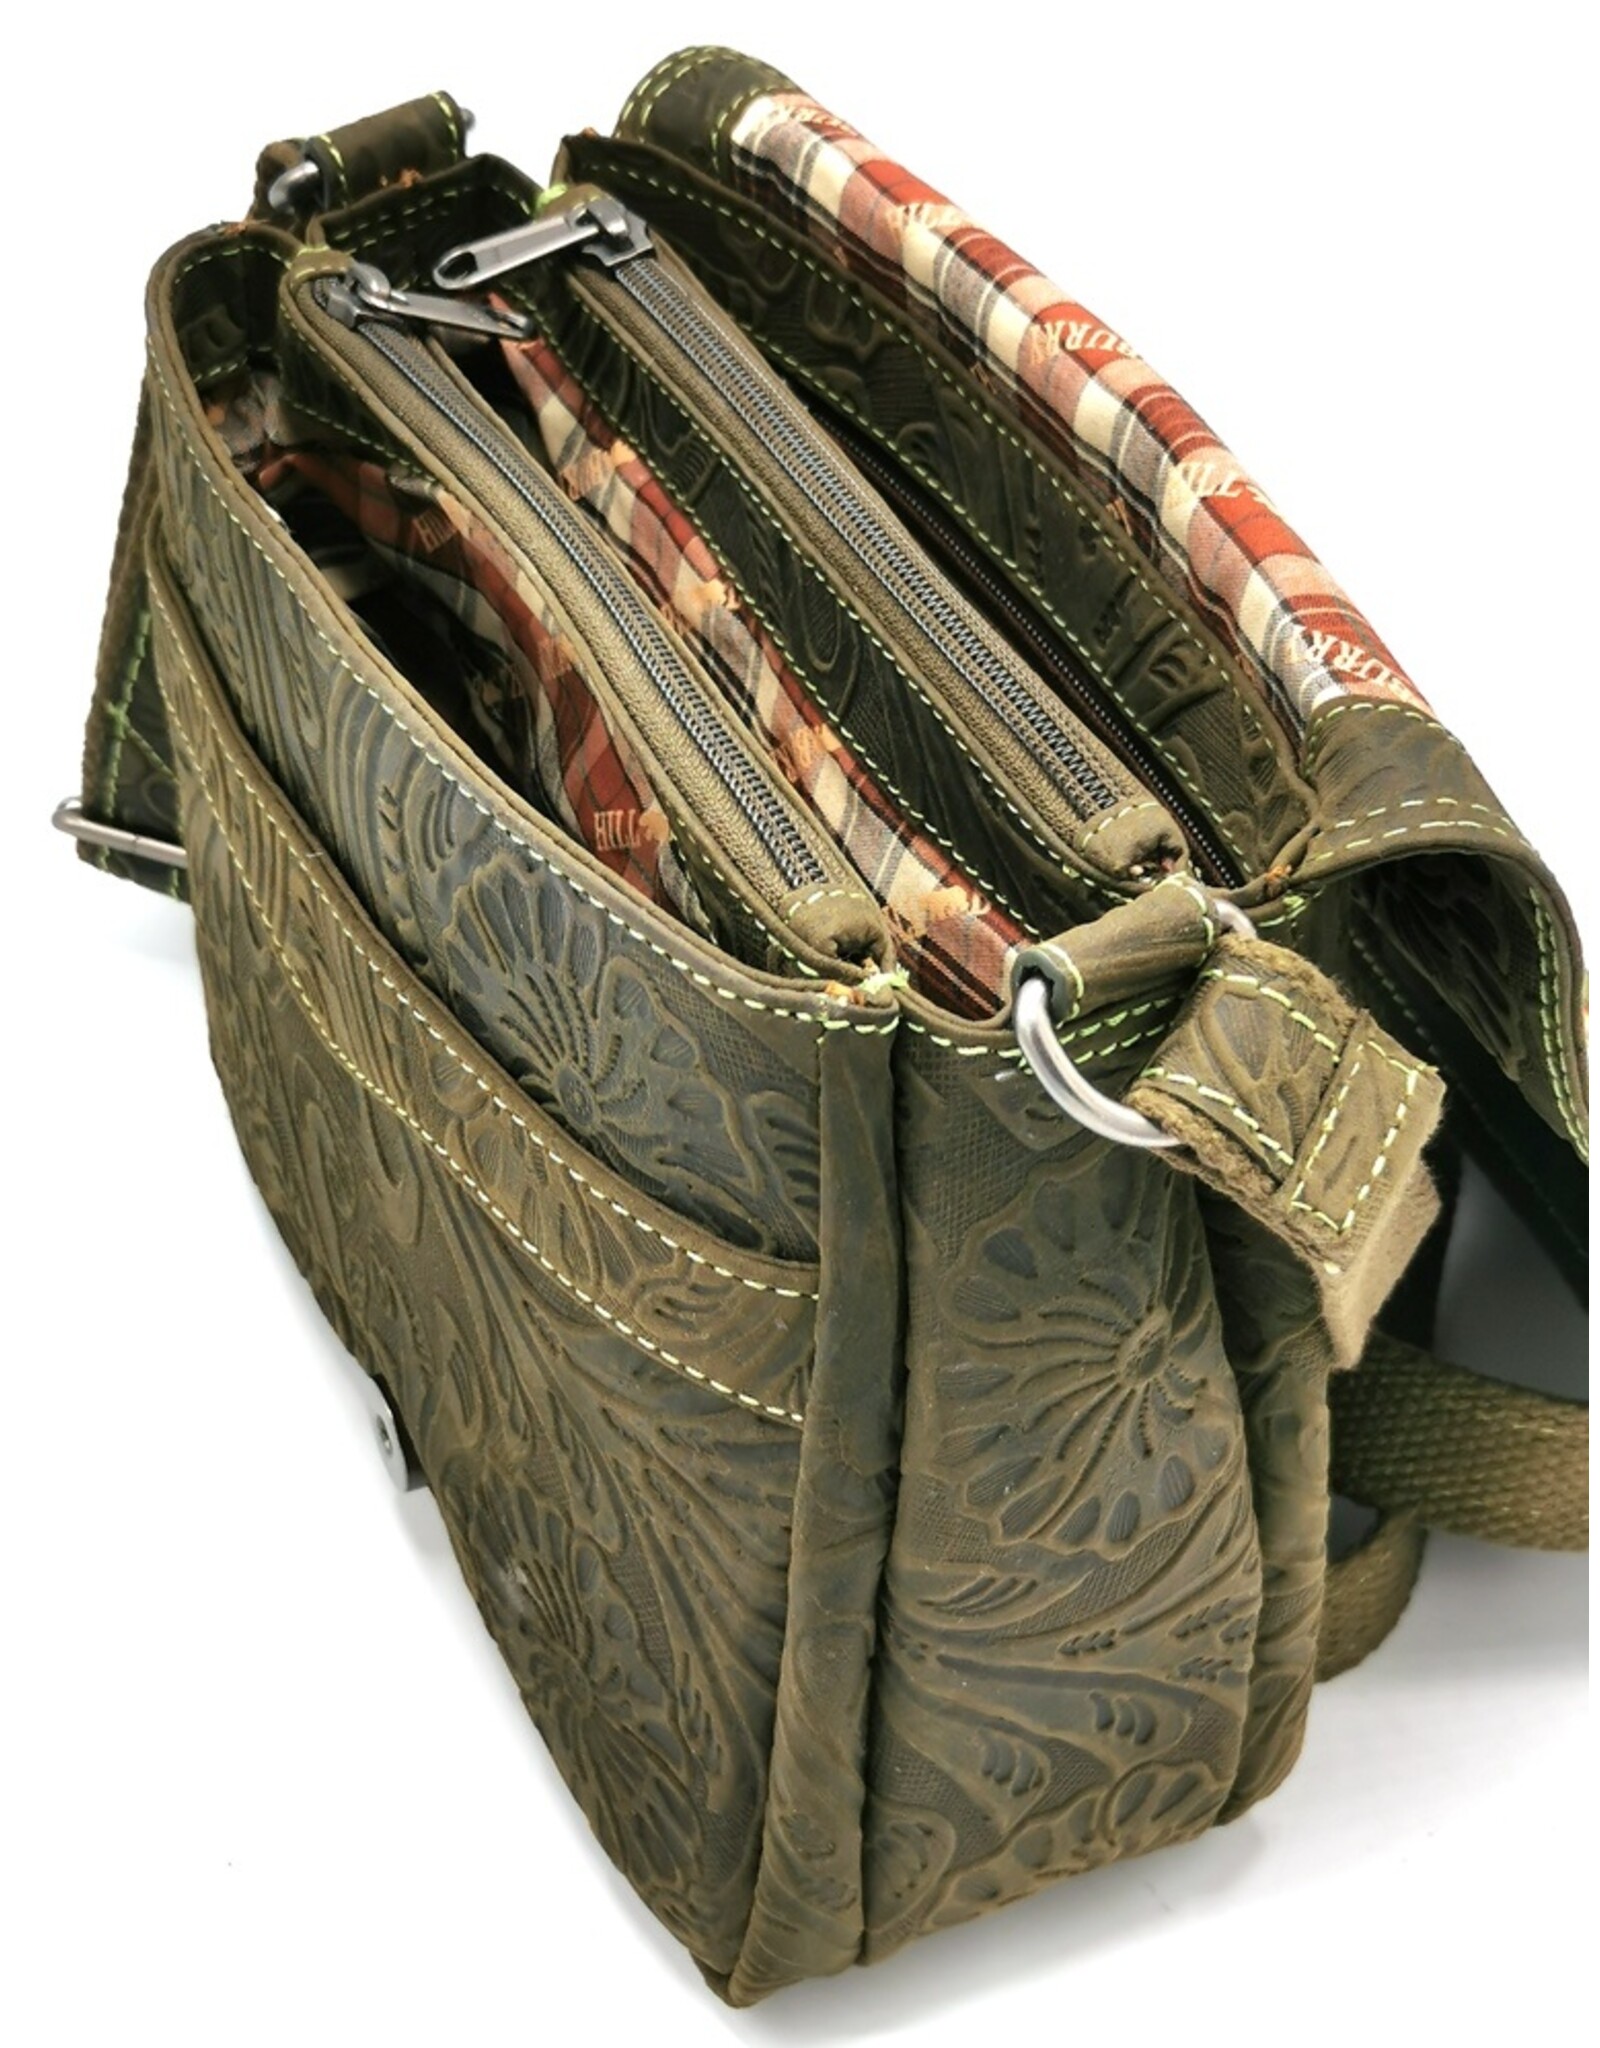 HillBurry Leather bags - Hillburry Shoulder bag with Embossed Flowers green